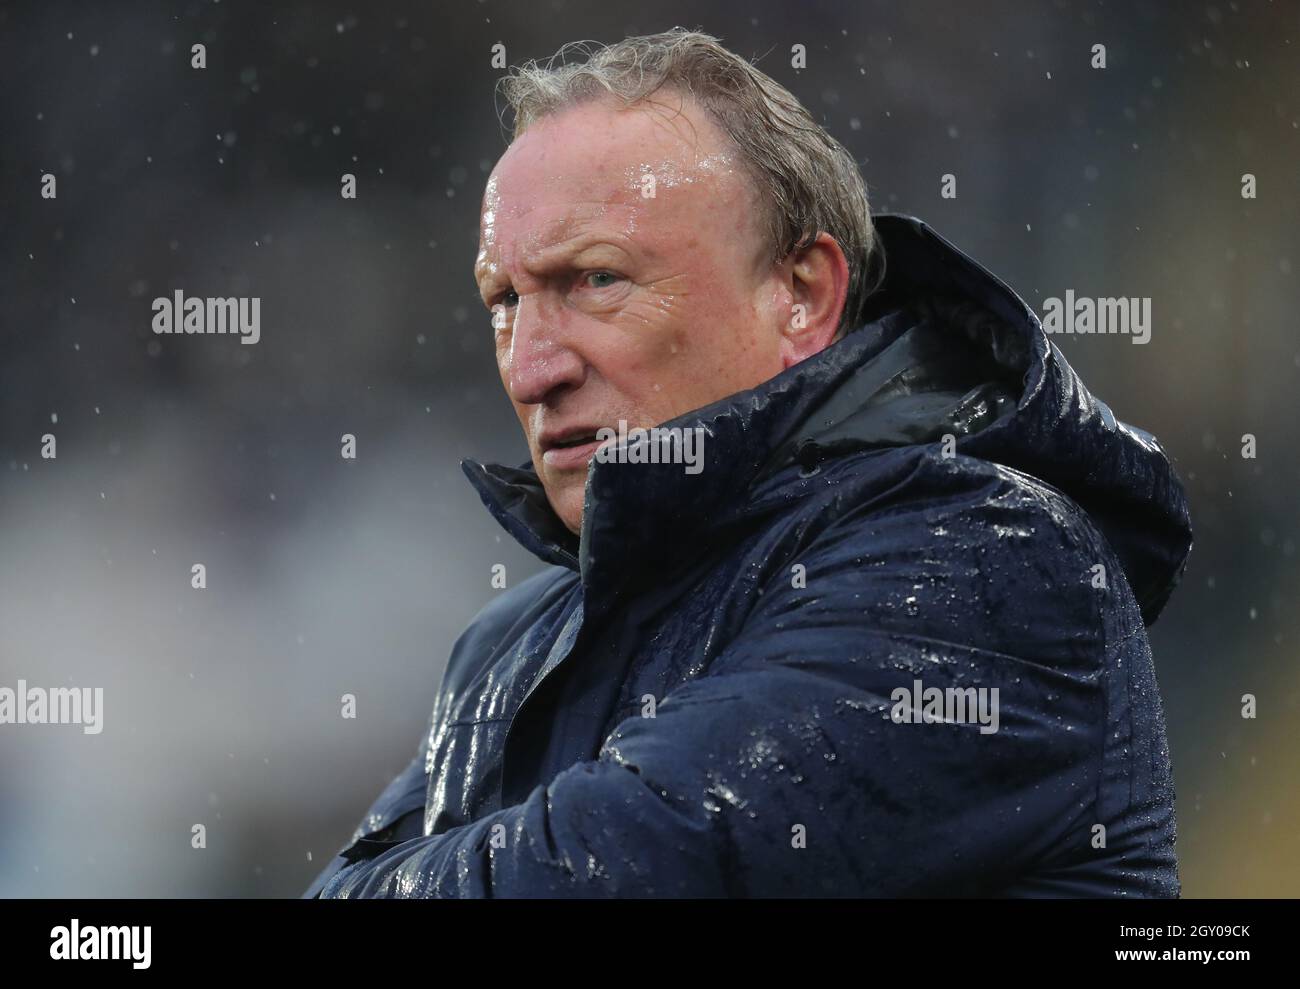 NEIL WARNOCK, MIDDLESBROUGH FC MANAGER, 2021 Stockfoto